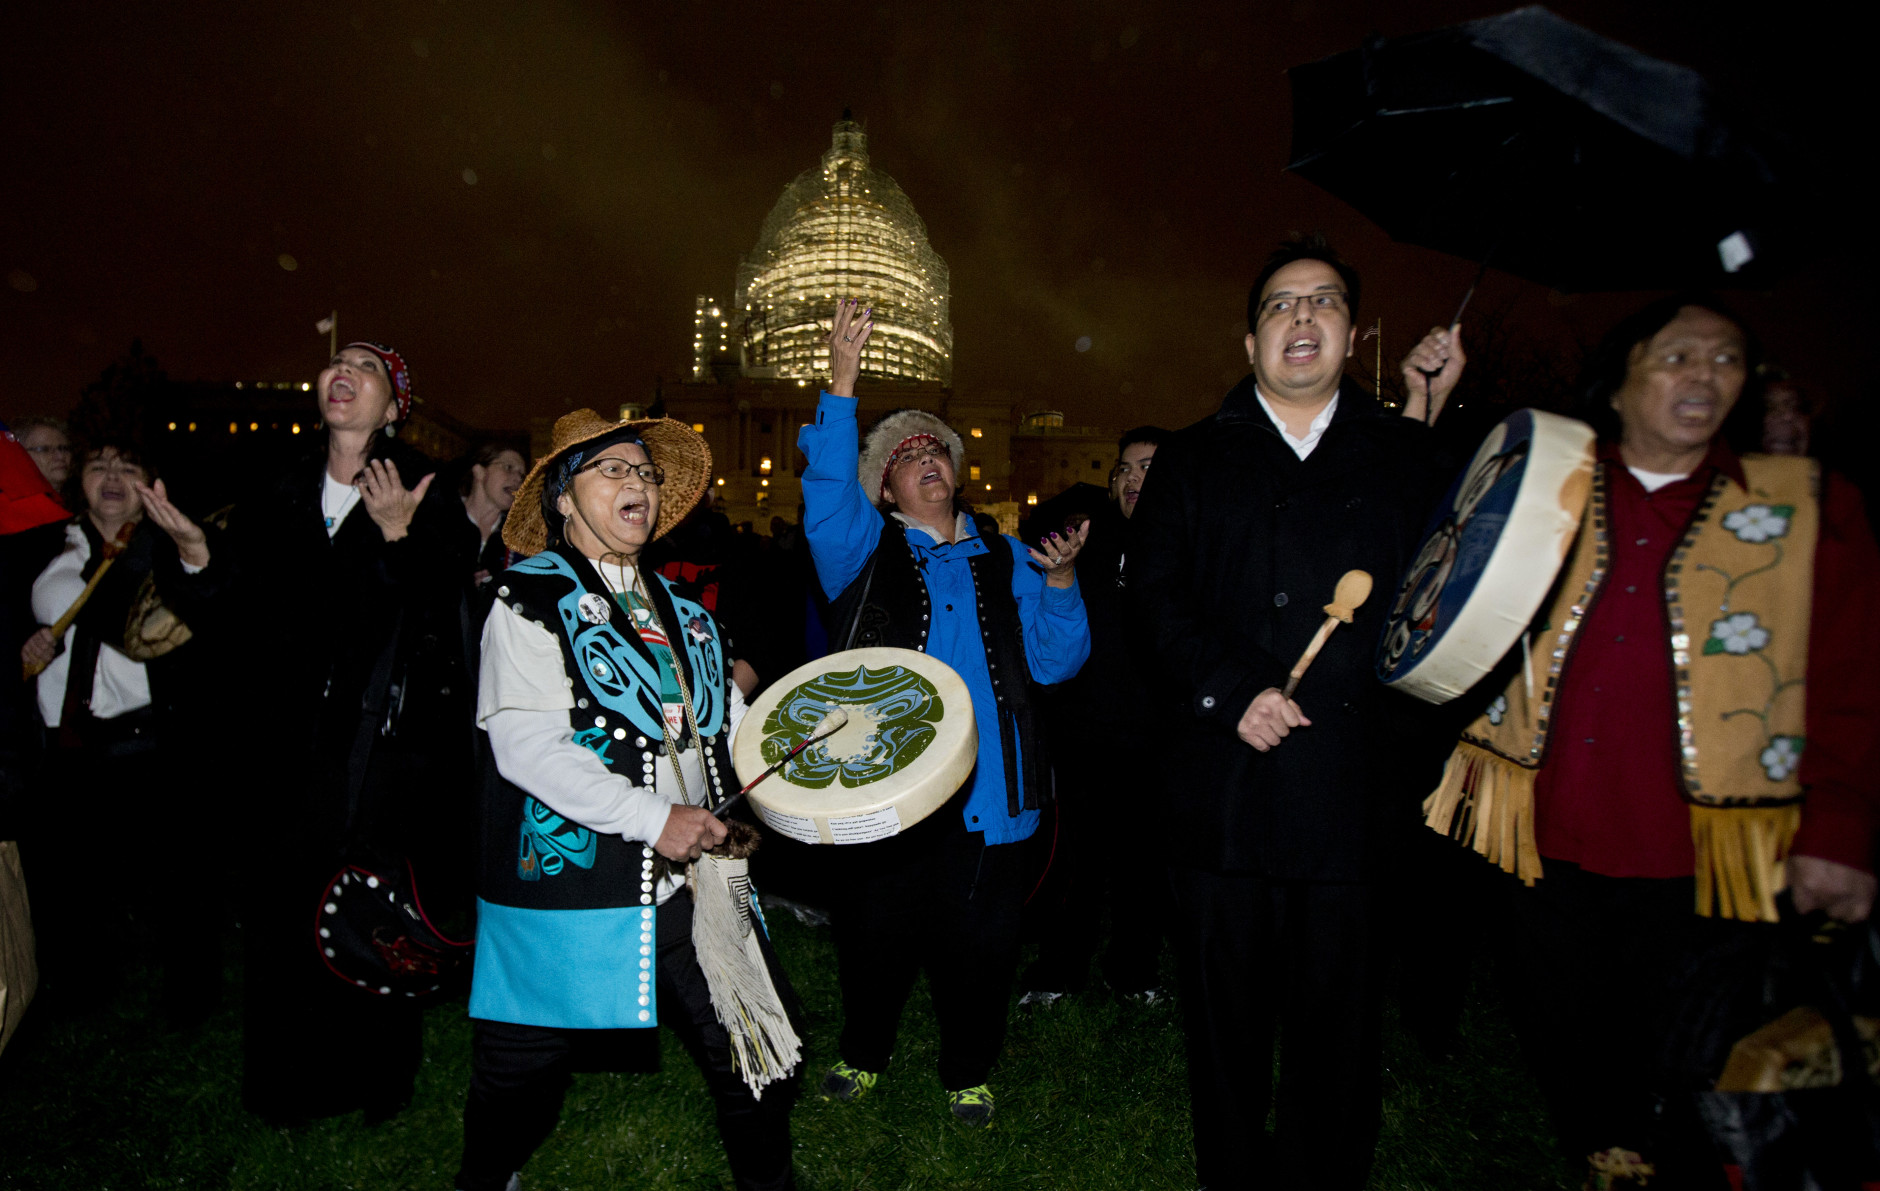 Amy Mitchell, second from left, and Adrea Ebona, front left, of the Tlingit tribe from Juneau, Alaska, and the Yaaw Tei Yi group, dance on the West Front of the Capitol in Washington, Wednesday, Dec. 2, 2015, during the lighting ceremony of the U.S. Capitol Christmas tree. The 2015 U.S. Capitol Christmas Tree is a 74 feet Lutz tree from Chugach National Forest in Alaska.   (AP Photo/Manuel Balce Ceneta)